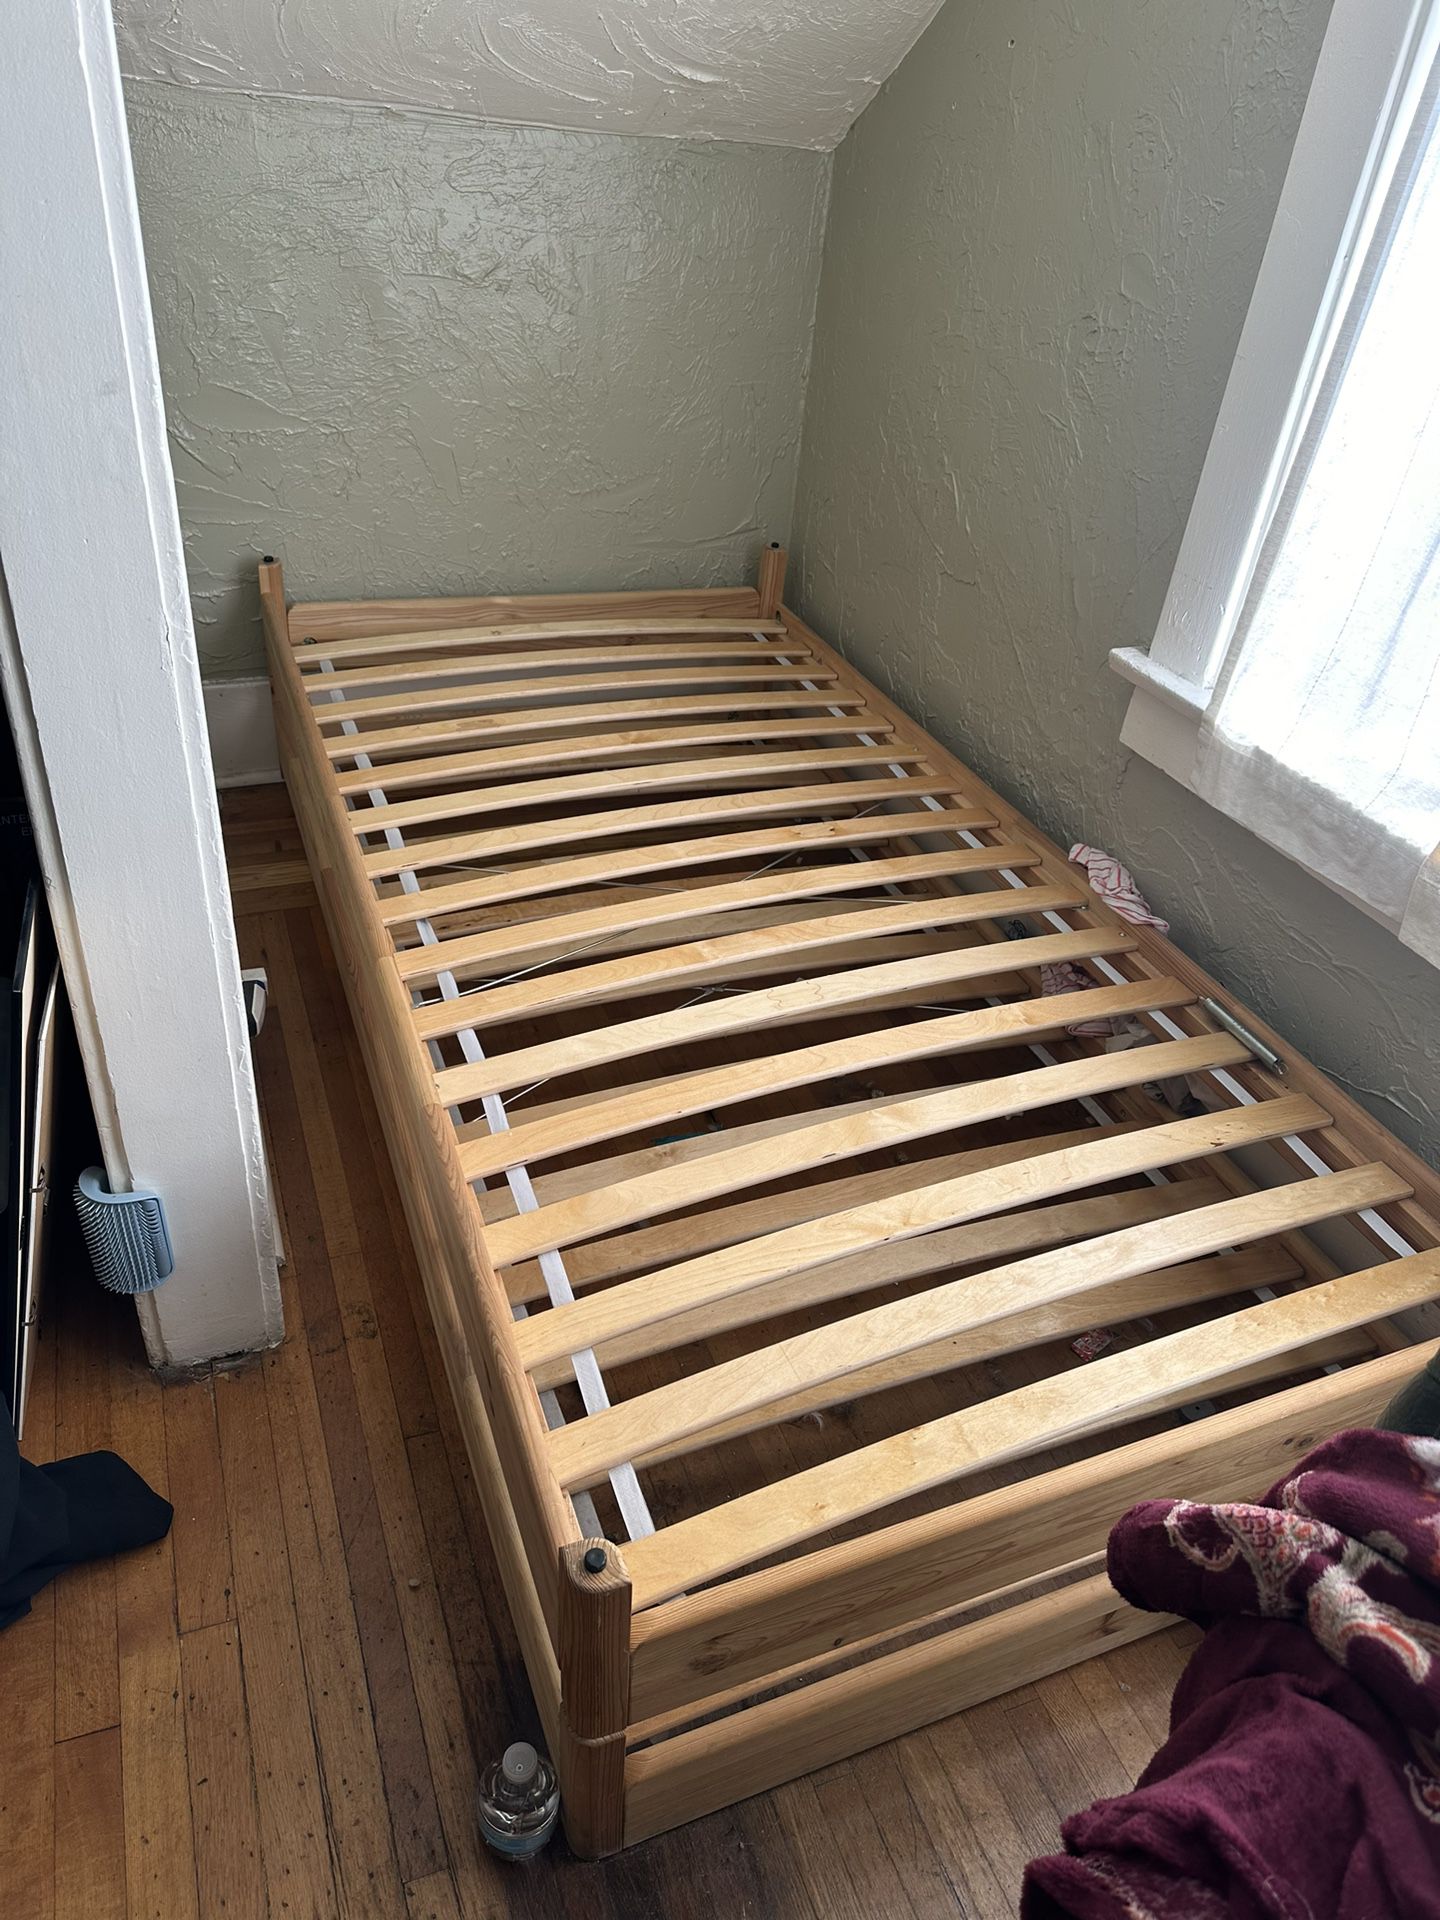 IKEA Double Twin Bed Frame Or Low Queen Bed